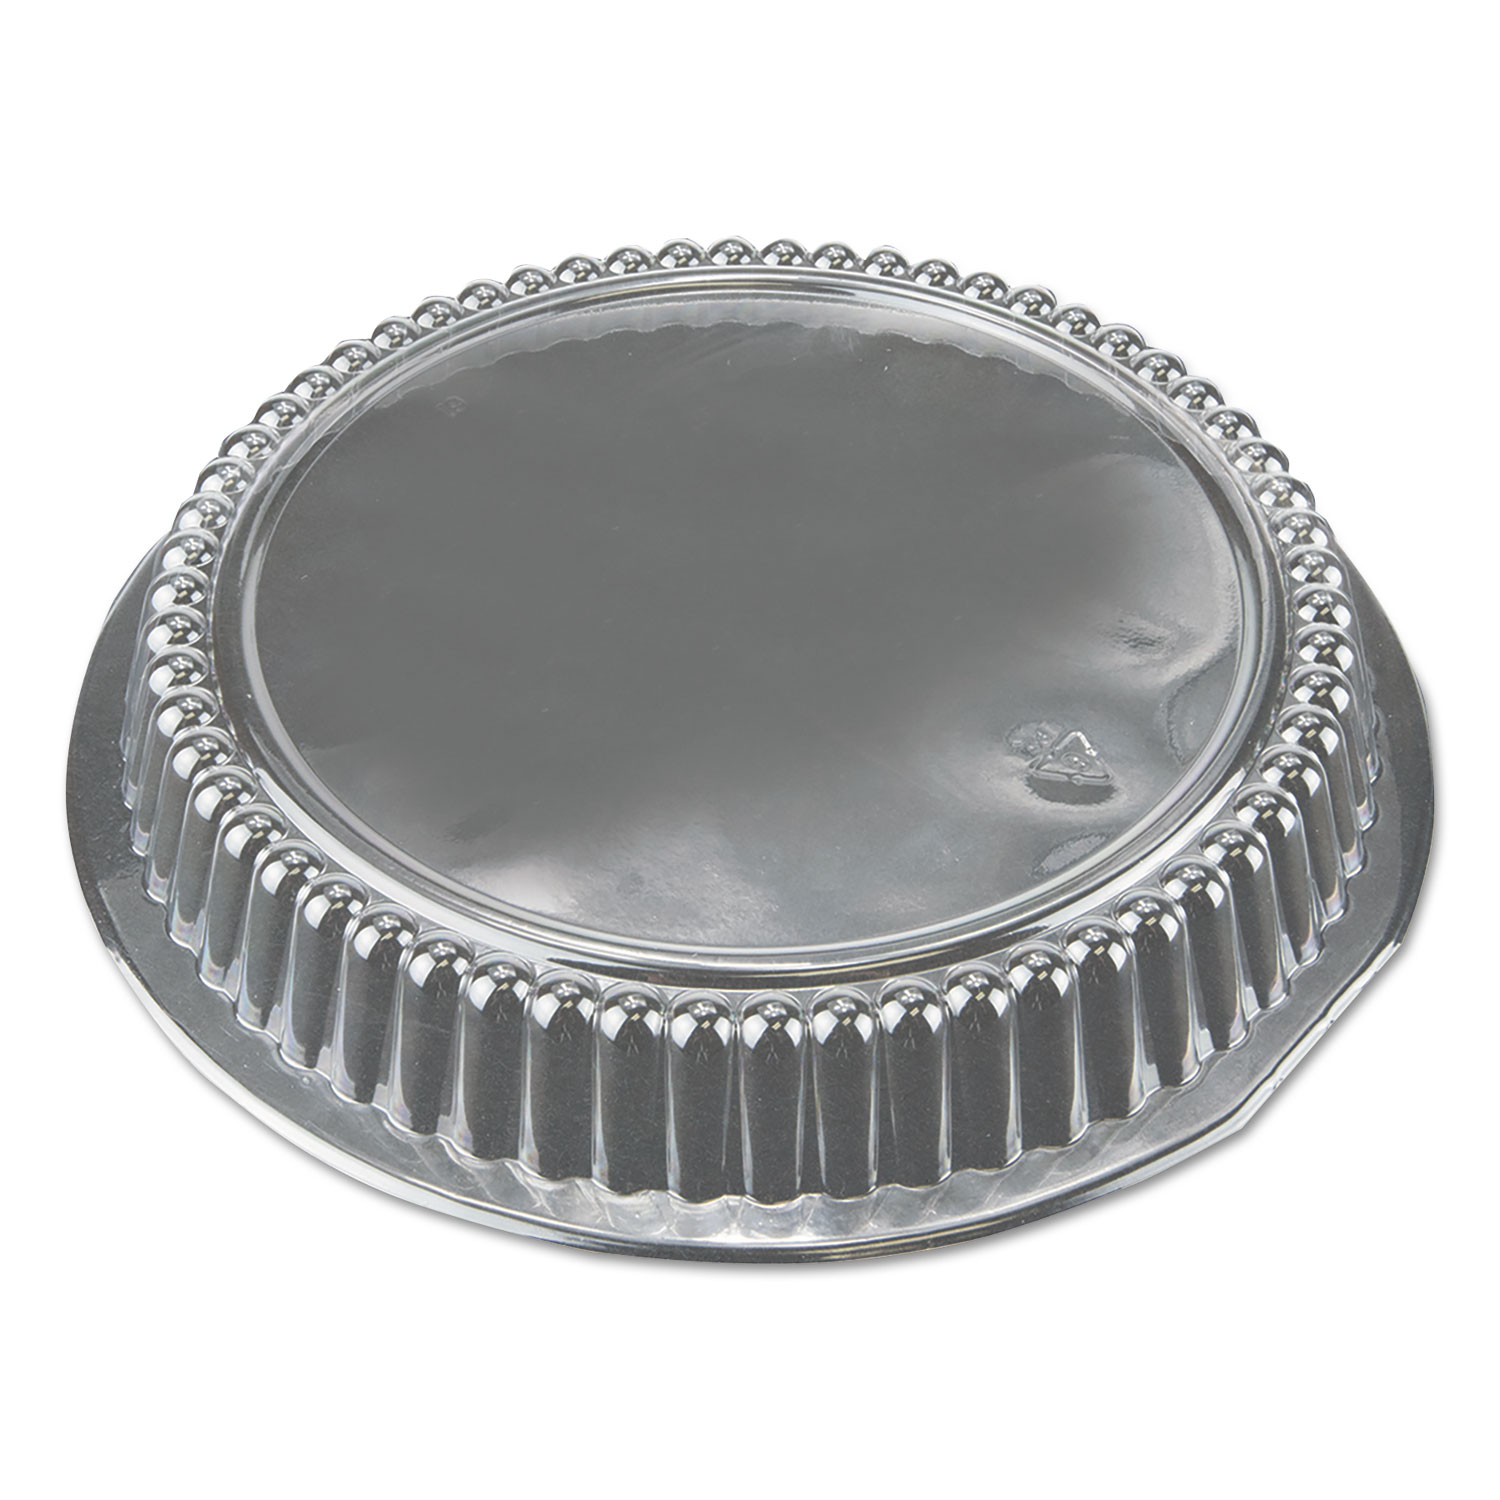  Durable Packaging P270500 Dome Lids for 7 Round Containers, 500/Carton (DPKP270500) 